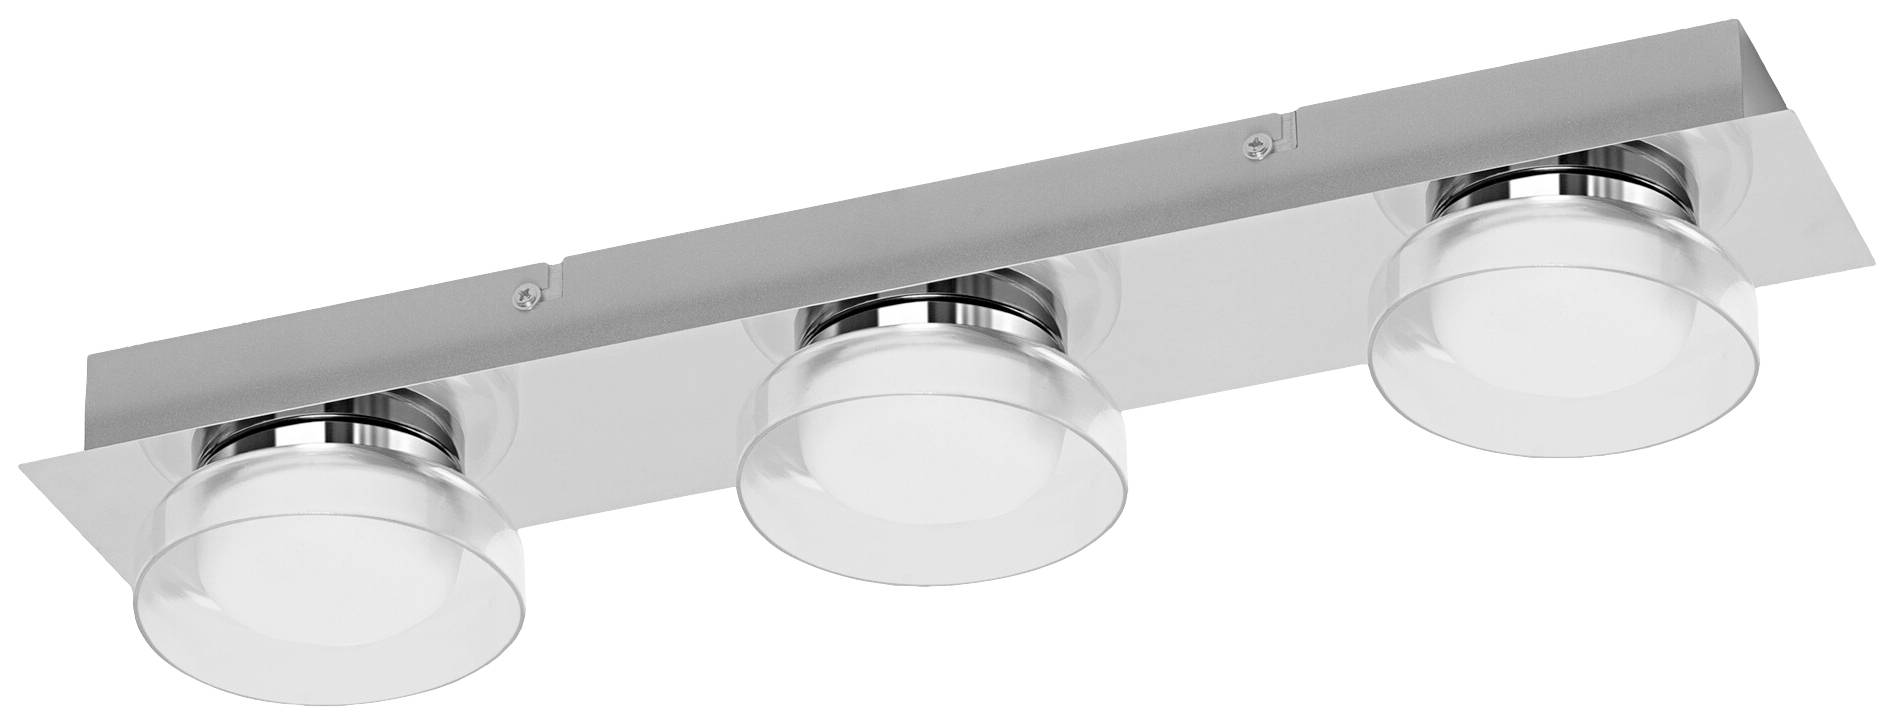 LEDVANCE BATHROOM DECORATIVE CEILING AND WALL WITH WIFI TECHNOLOGY 4058075573727 LED-Bad-Decken